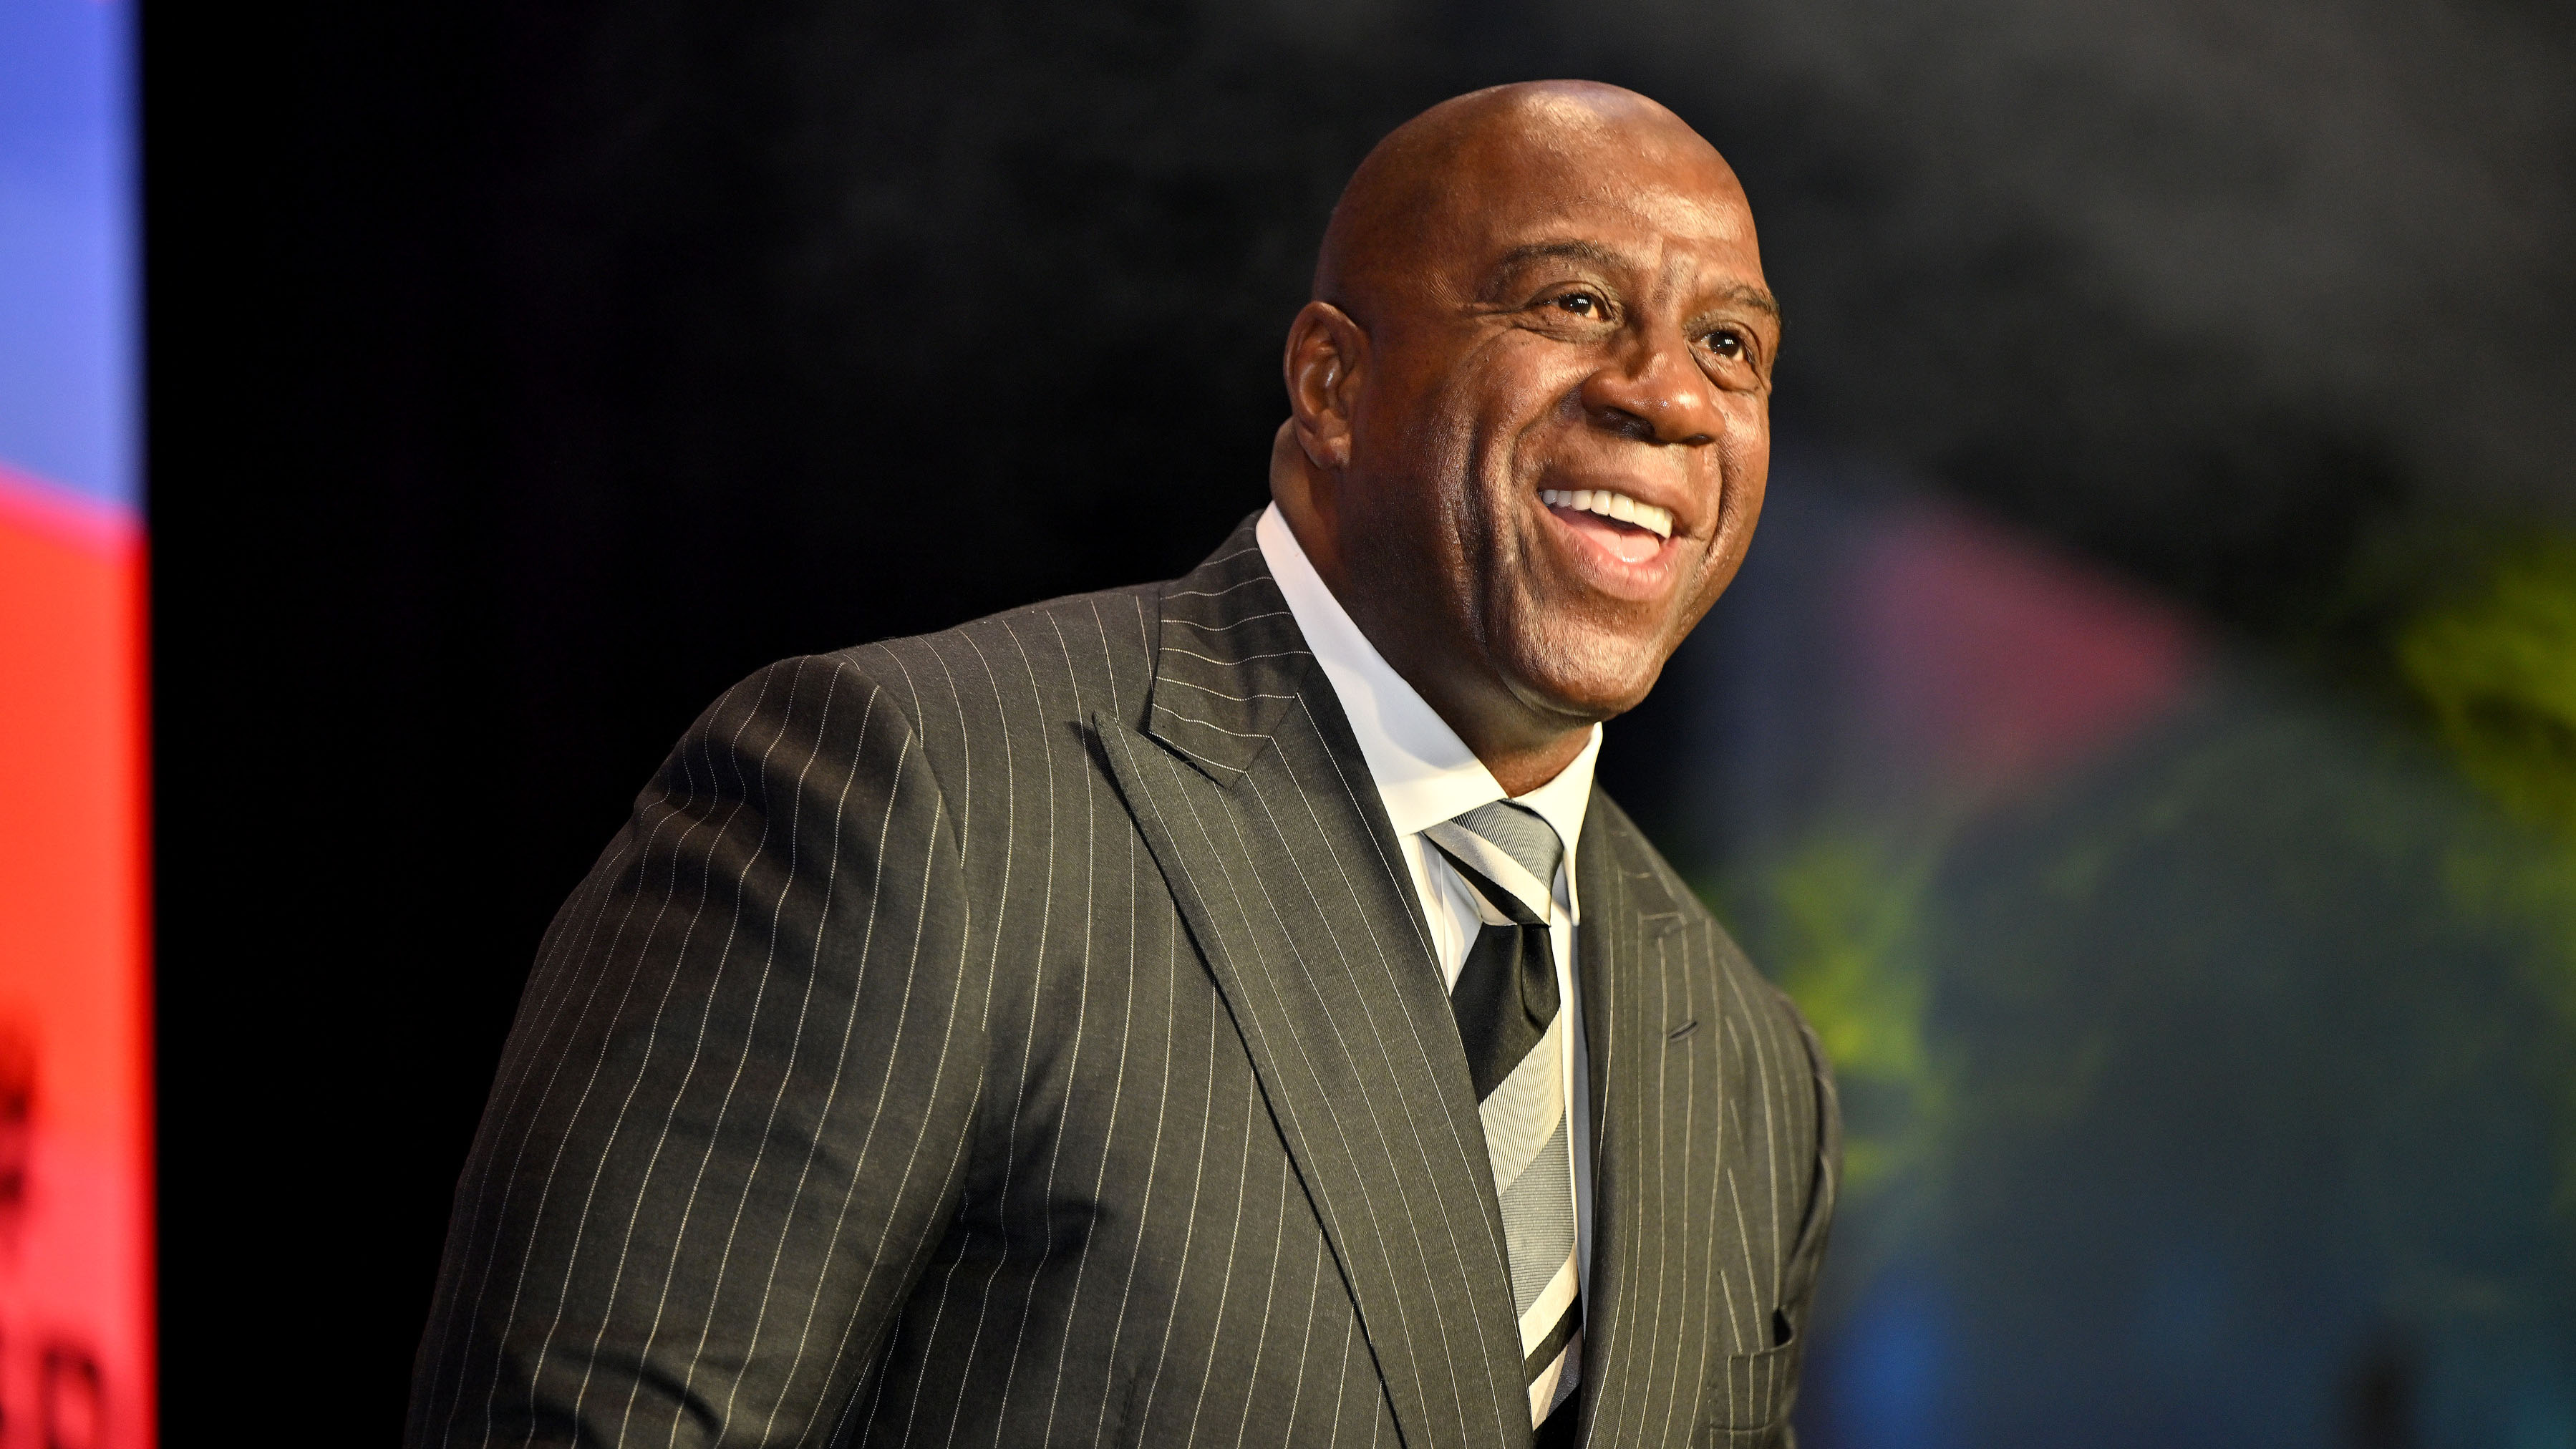 Over the span of 4 years, Magic Johnson won 3 different